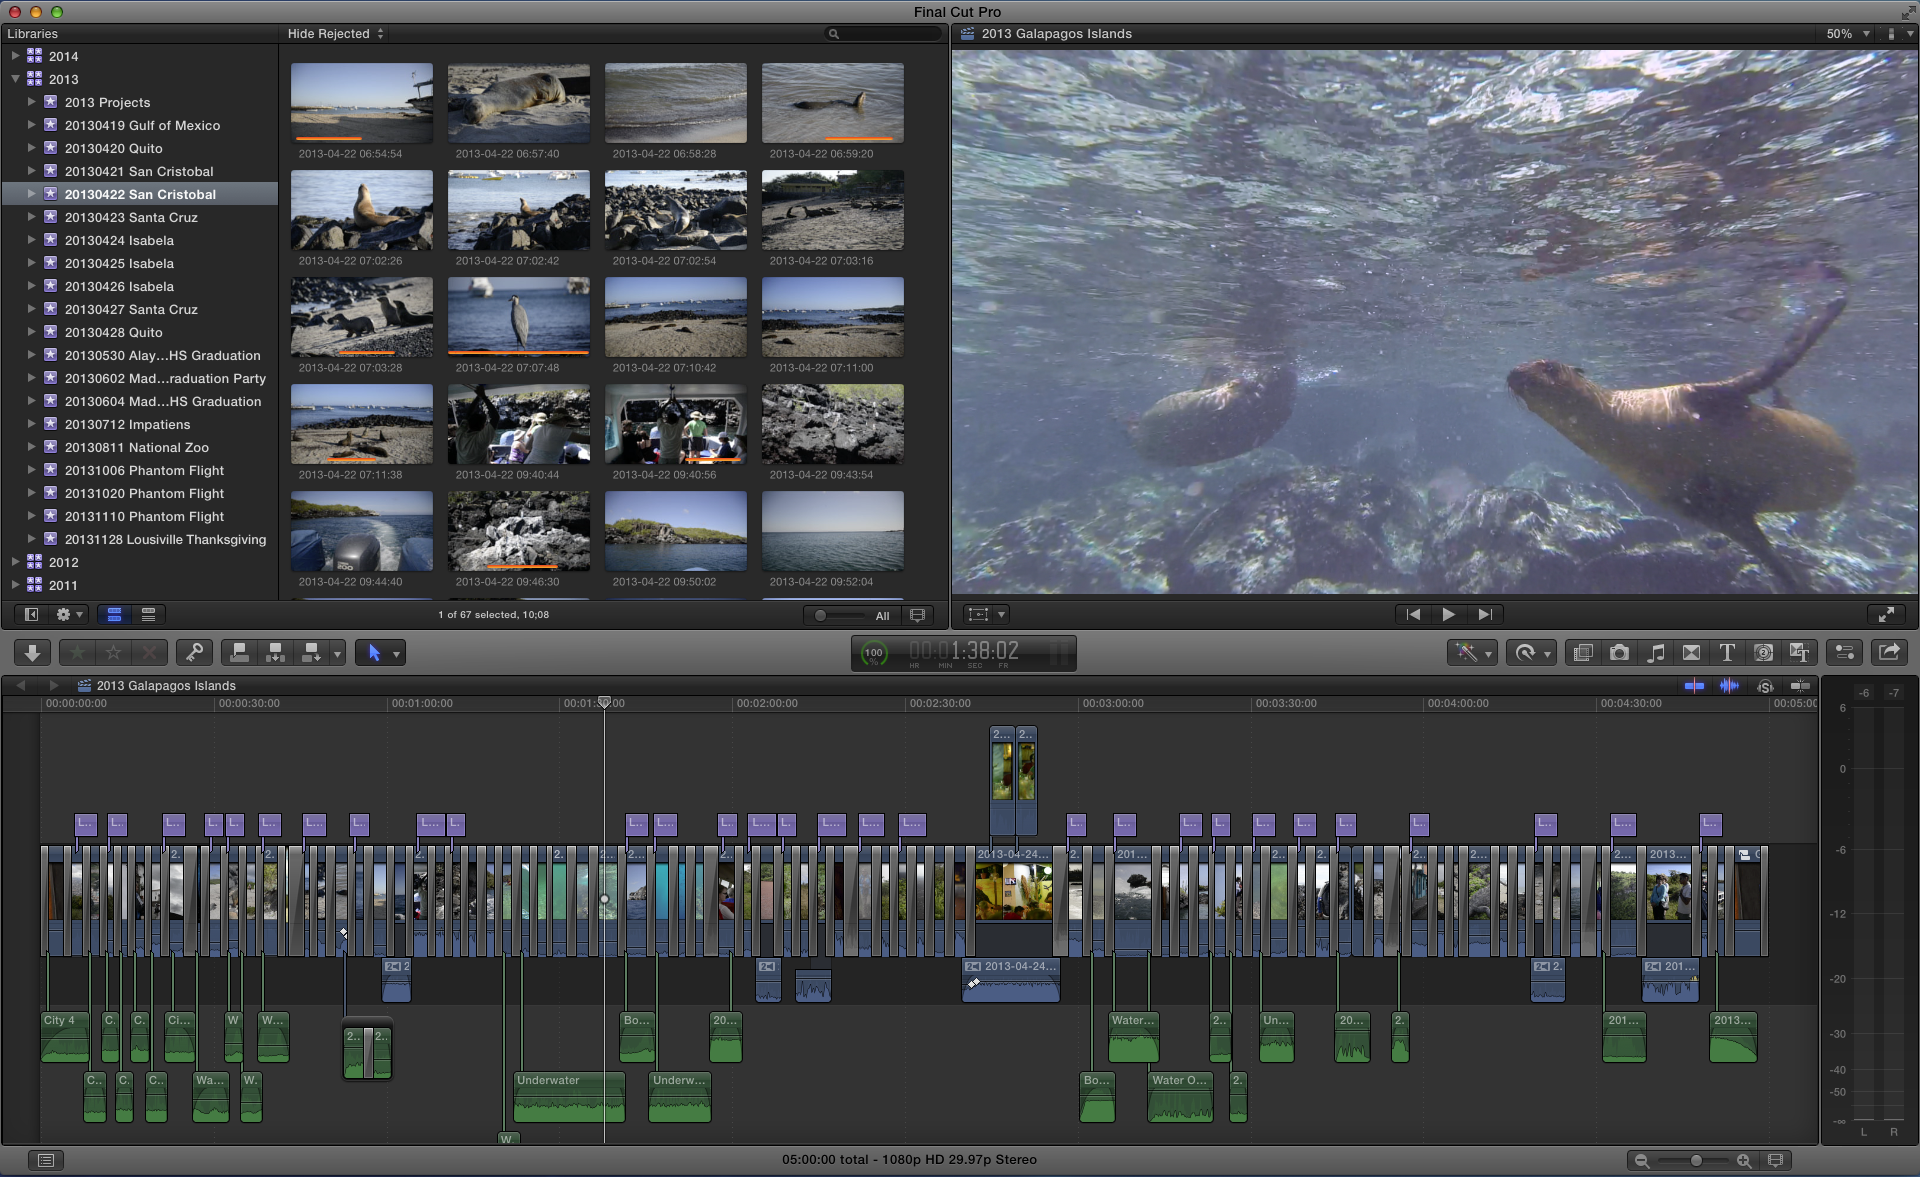 Final Cut Pro X Galapagos Project Timeline